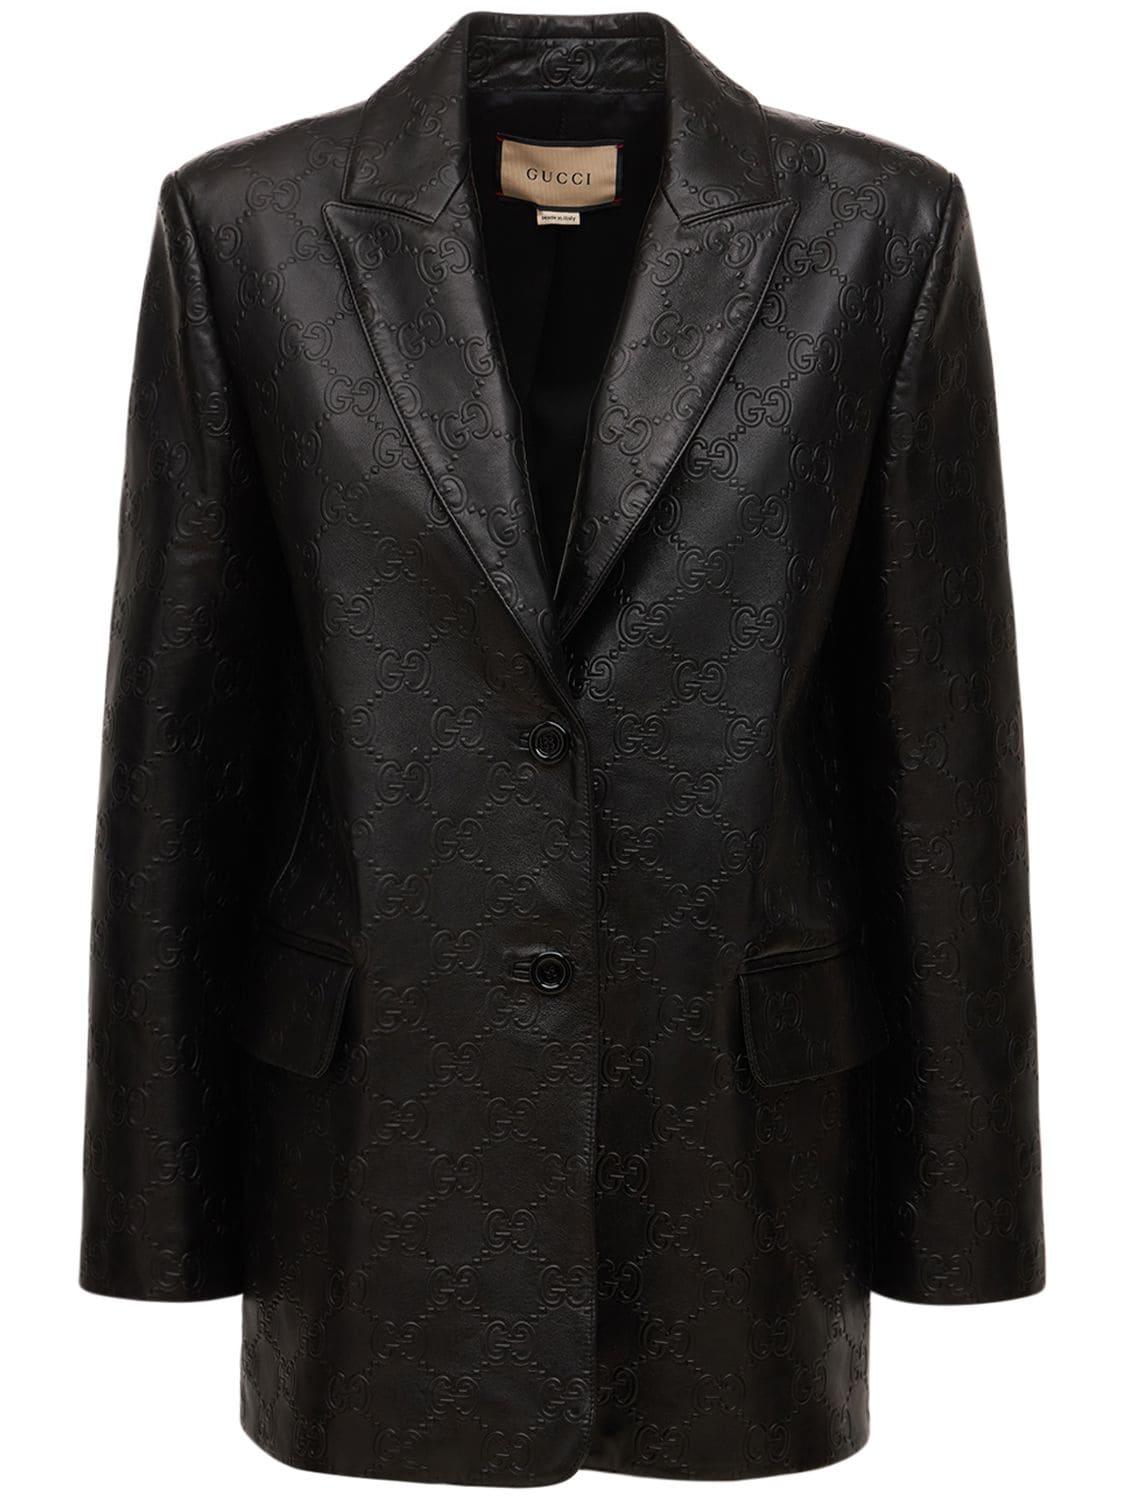 Image of Soft Nappa Leather Blazer W/ All Over Gg